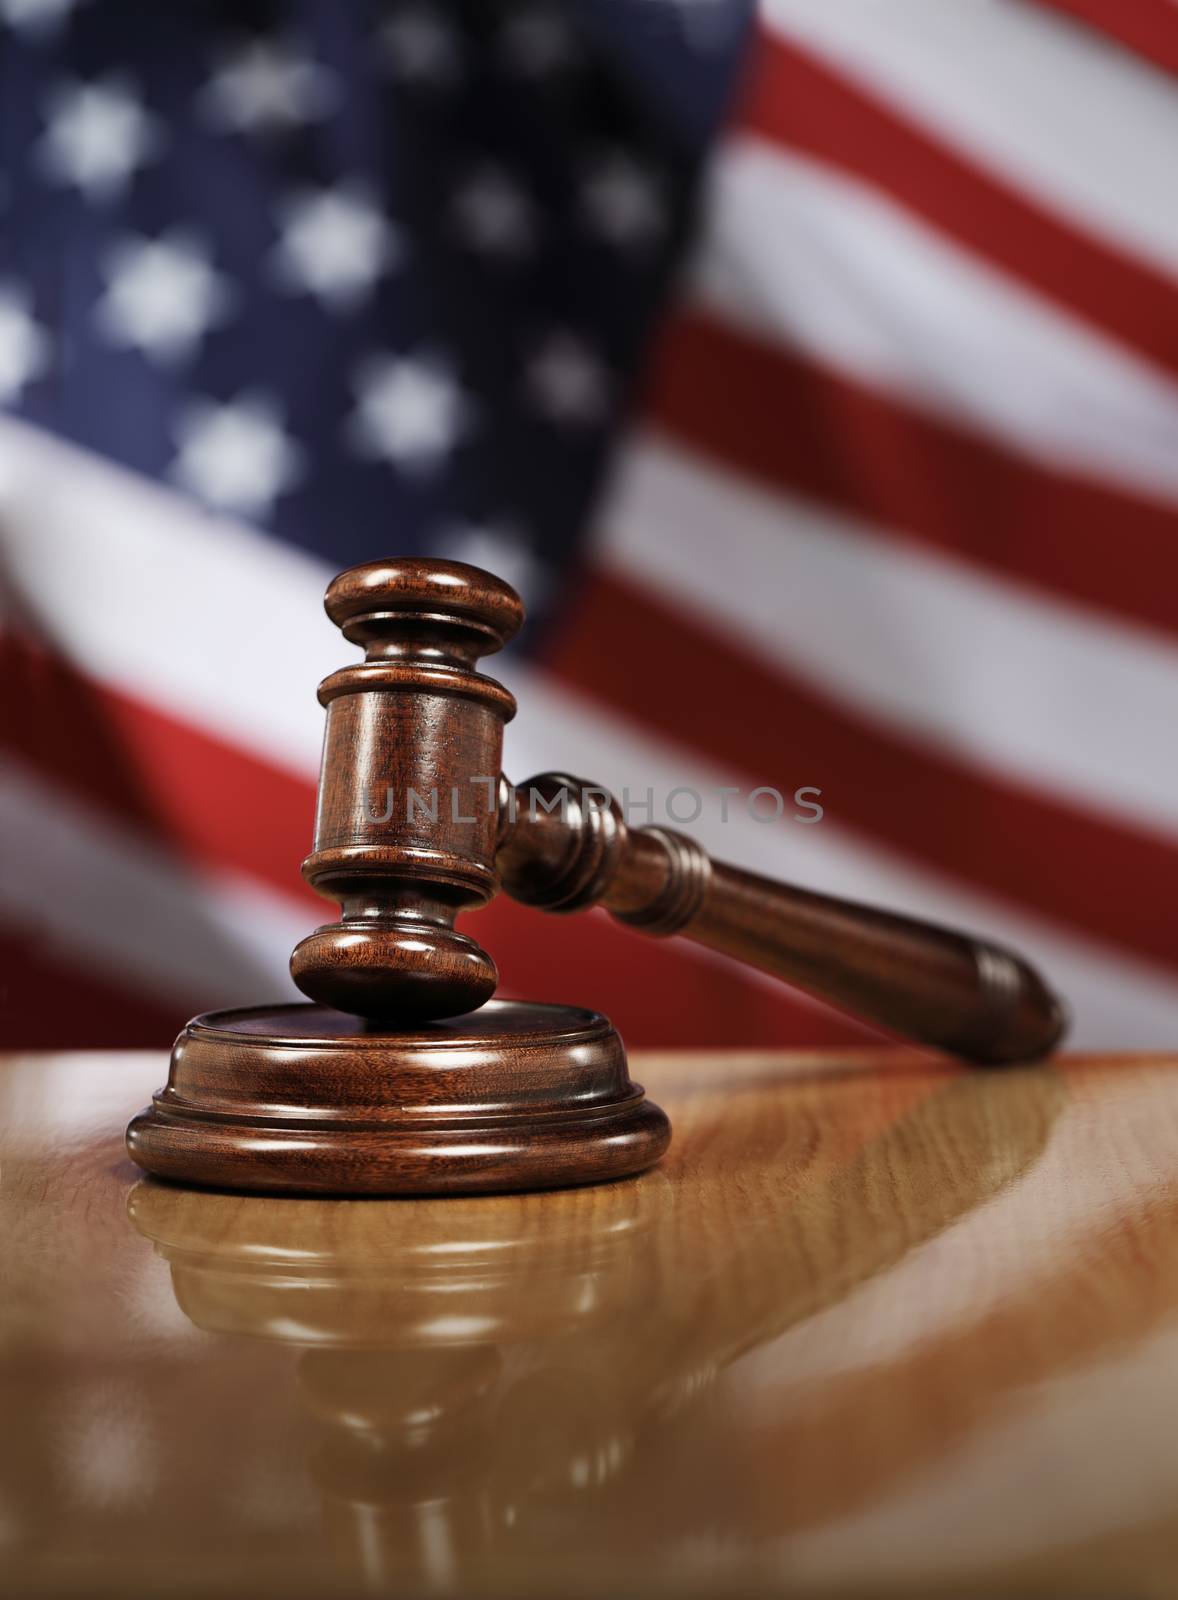 Wooden gavel on glossy table, The flag of USA in the background.